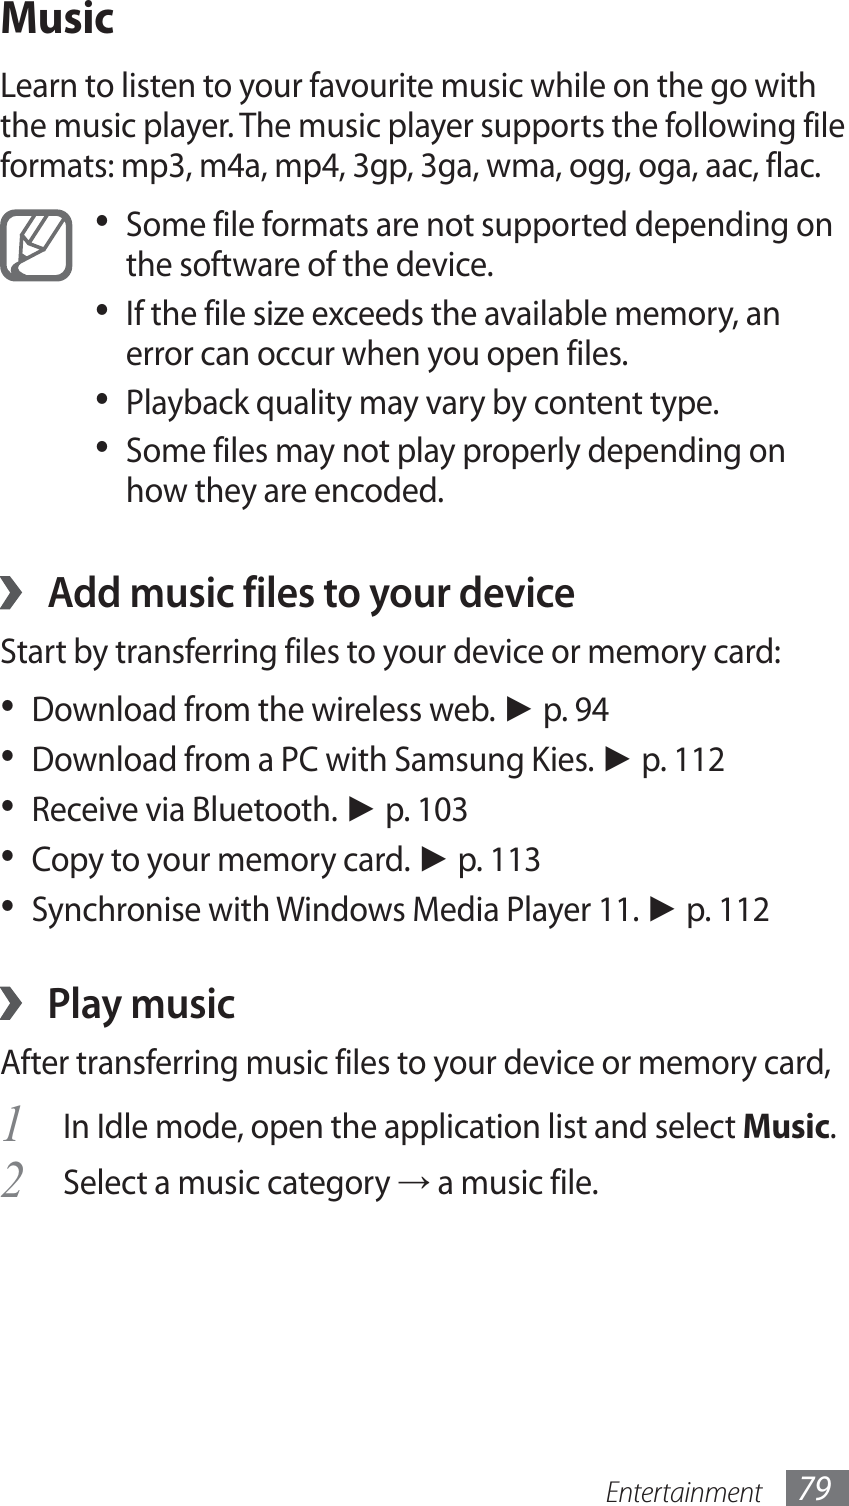 Entertainment 79MusicLearn to listen to your favourite music while on the go with the music player. The music player supports the following file formats: mp3, m4a, mp4, 3gp, 3ga, wma, ogg, oga, aac, flac.Some file formats are not supported depending on • the software of the device.If the file size exceeds the available memory, an • error can occur when you open files.Playback quality may vary by content type.• Some files may not play properly depending on • how they are encoded. Add music files to your device ›Start by transferring files to your device or memory card:Download from the wireless web. •  ► p. 94Download from a PC with Samsung Kies. •  ► p. 112Receive via Bluetooth. •  ► p. 103Copy to your memory card. •  ► p. 113Synchronise with Windows Media Player 11. •  ► p. 112Play music ›After transferring music files to your device or memory card,In Idle mode, open the application list and select 1 Music.Select a music category 2 → a music file.